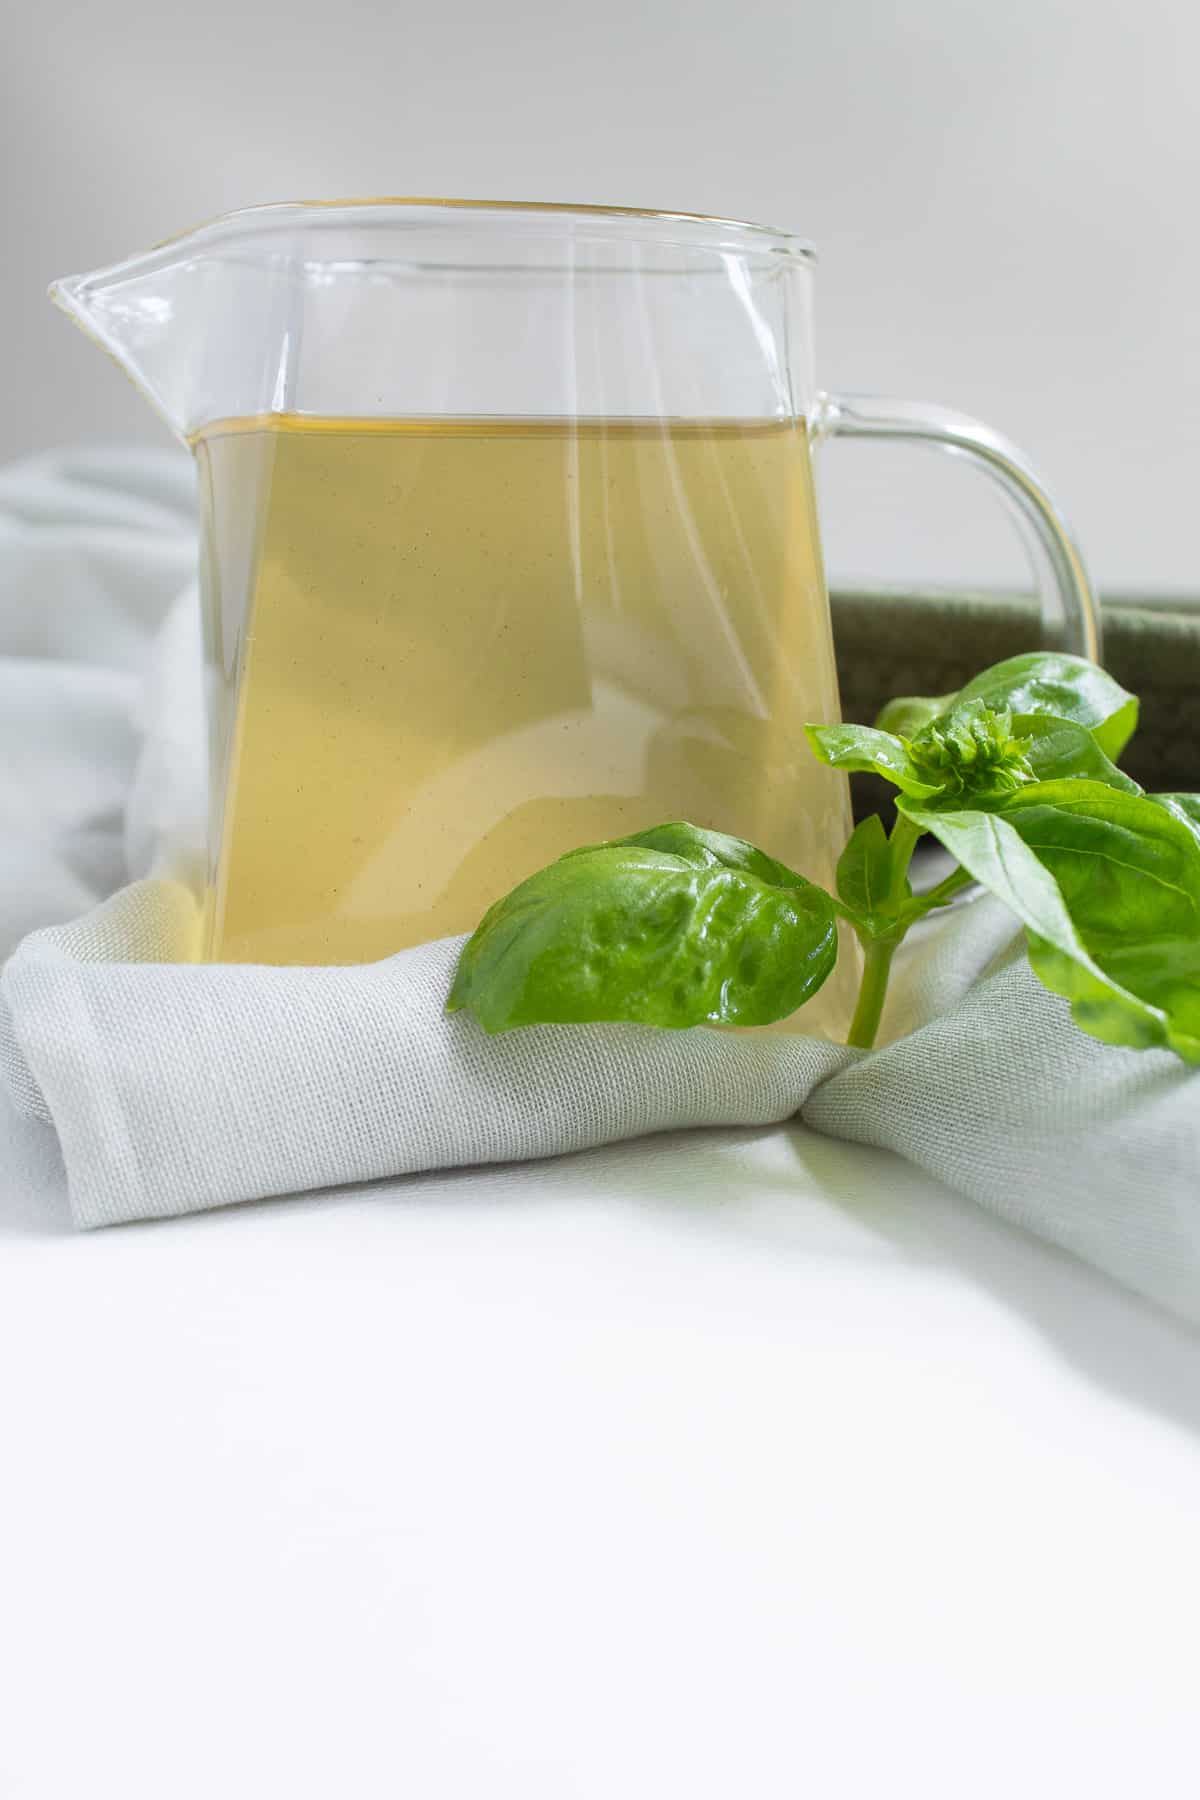 A pale yellow syrup in a clear glass pitcher sits on green fabric next to basil leaves.